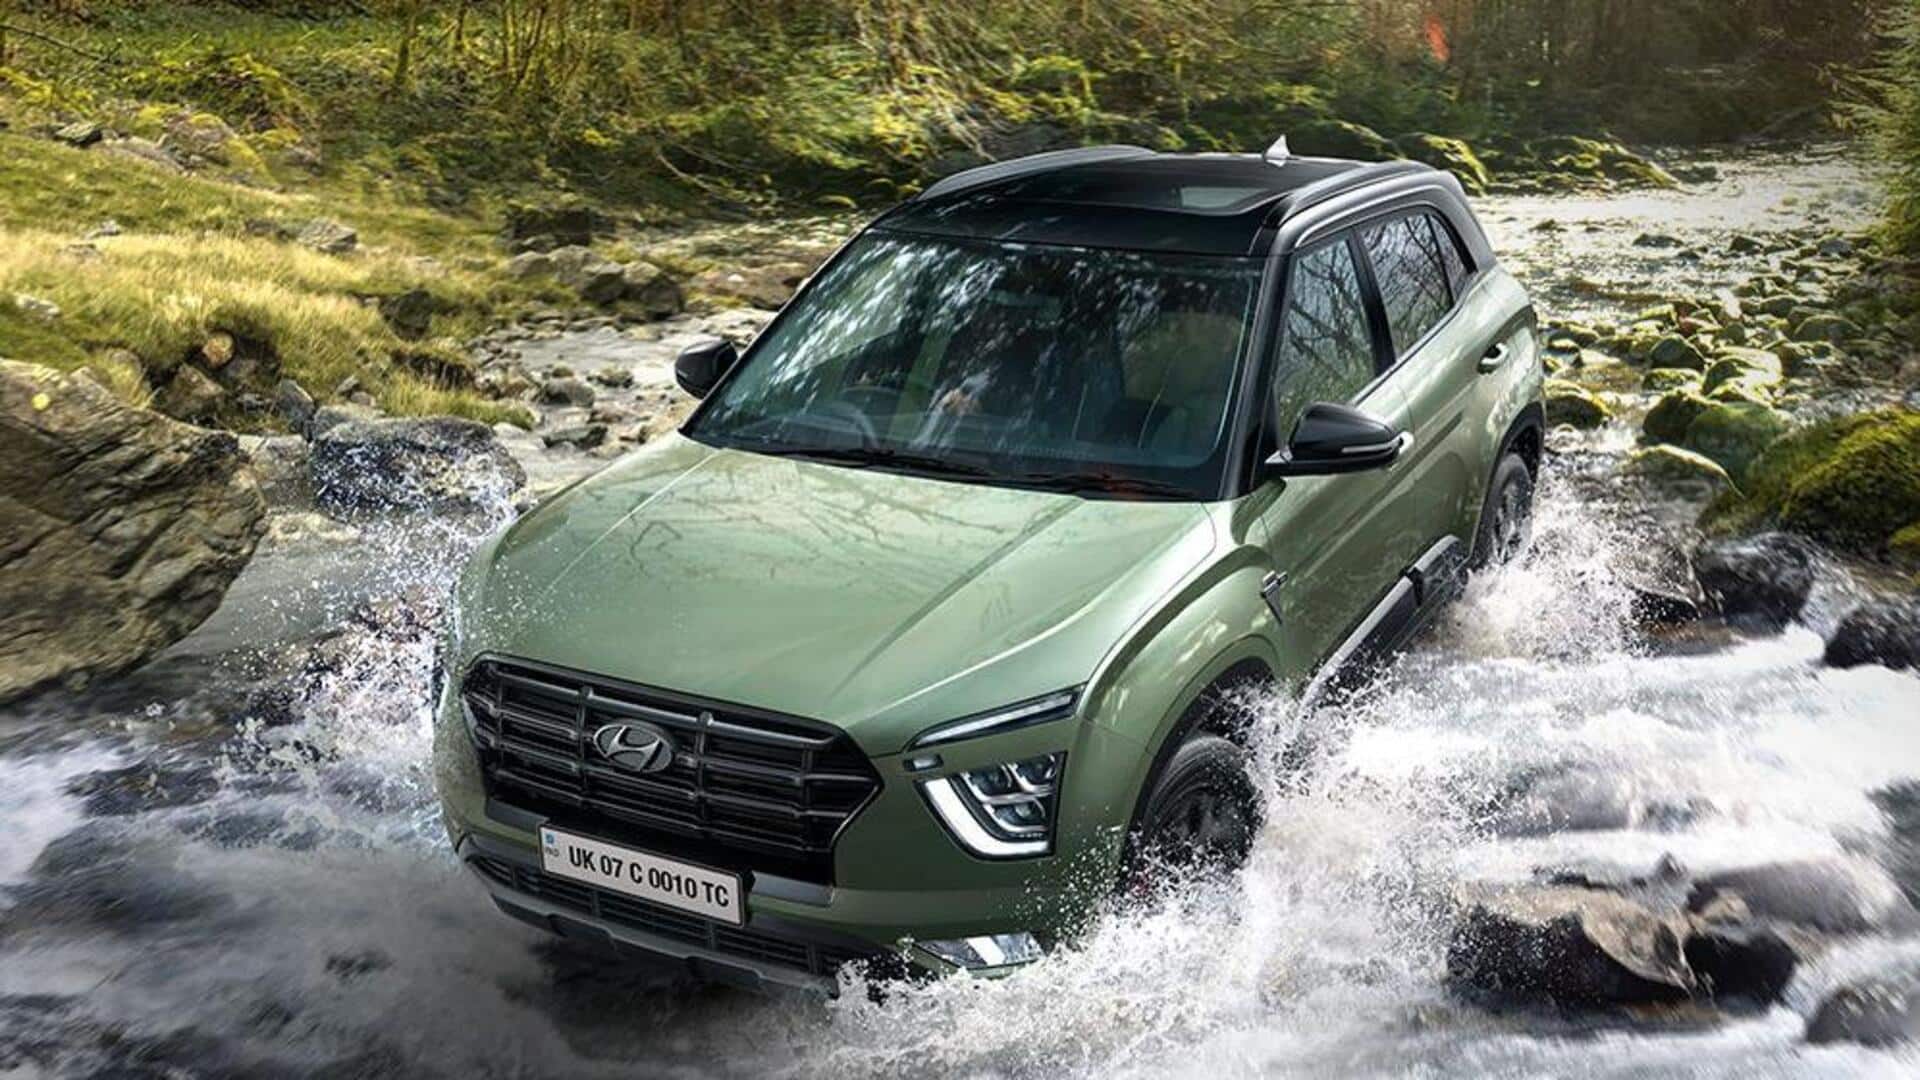 Hyundai CRETA (facelift) in the works: What to expect